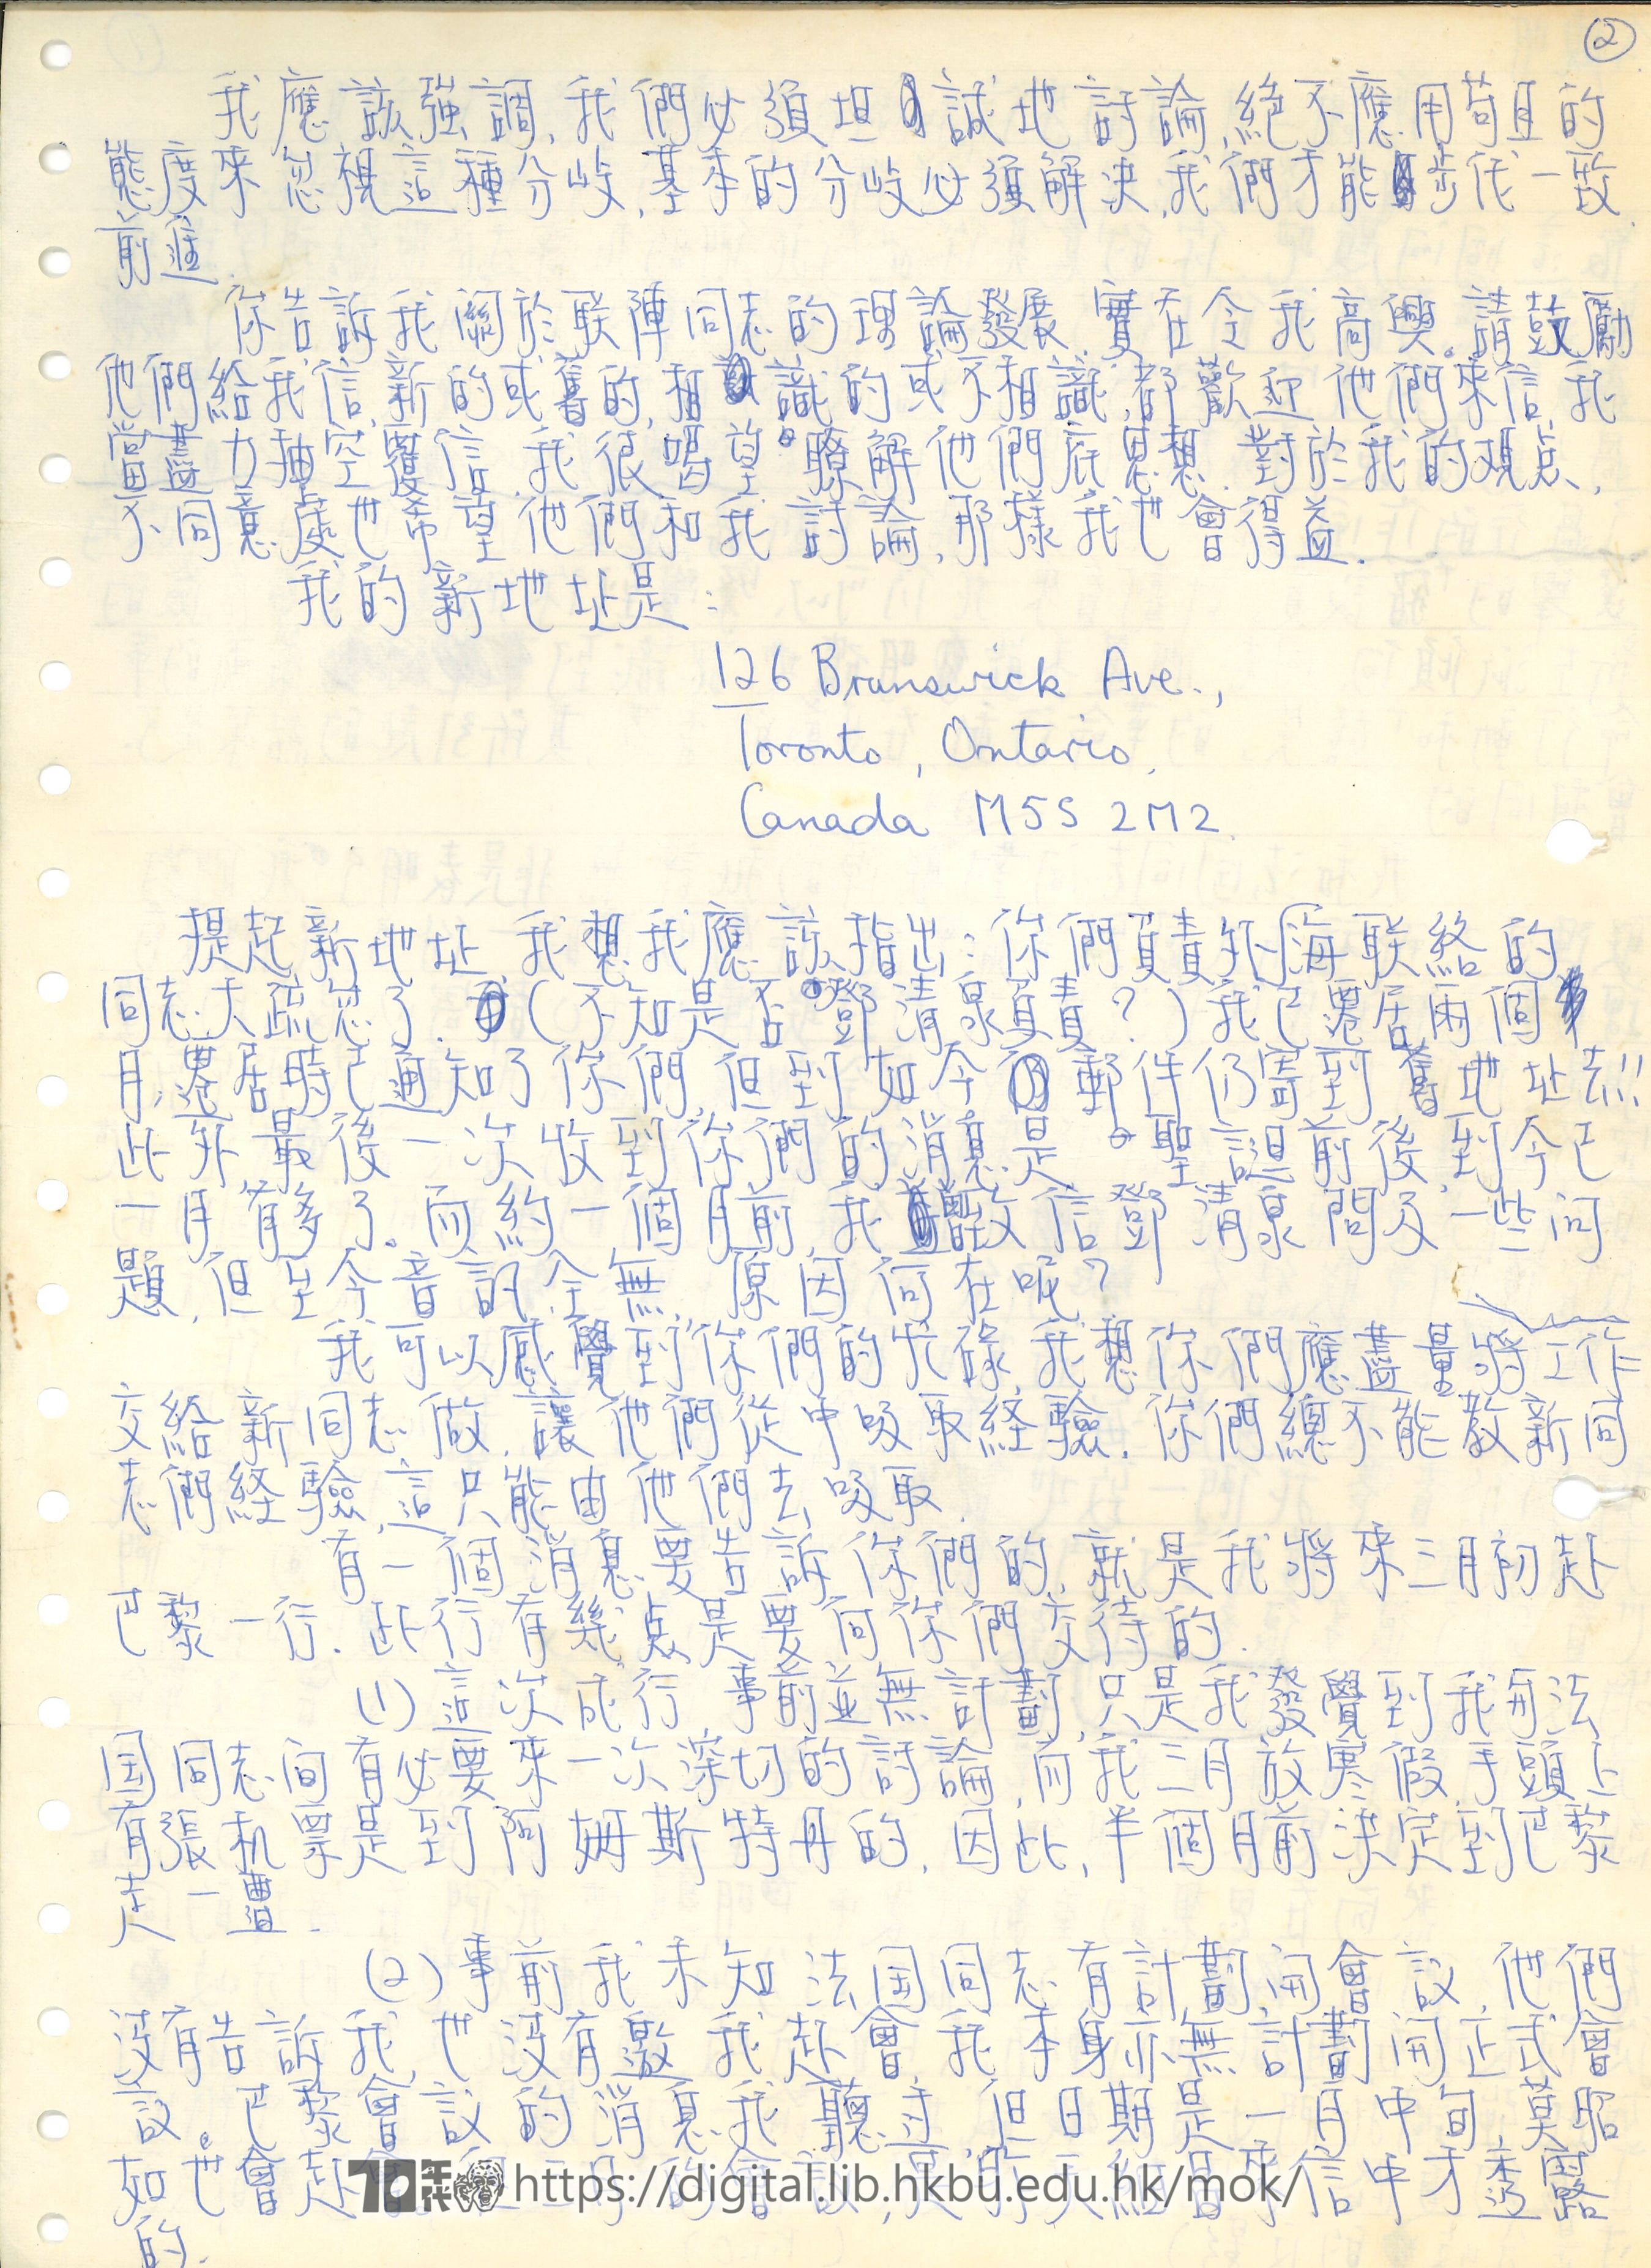   Letter from Lee Wai-ming to Lee Keng Ming  